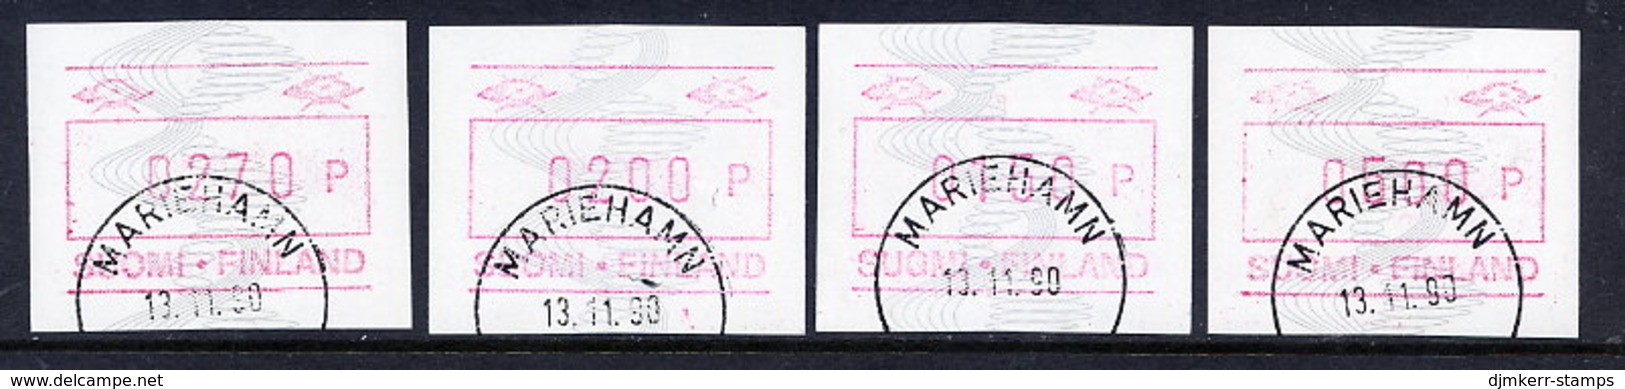 FINLAND 1990 Definitive Without ATM Number , 4 Different Values Used.  Michel 7 - Automatenmarken [ATM]